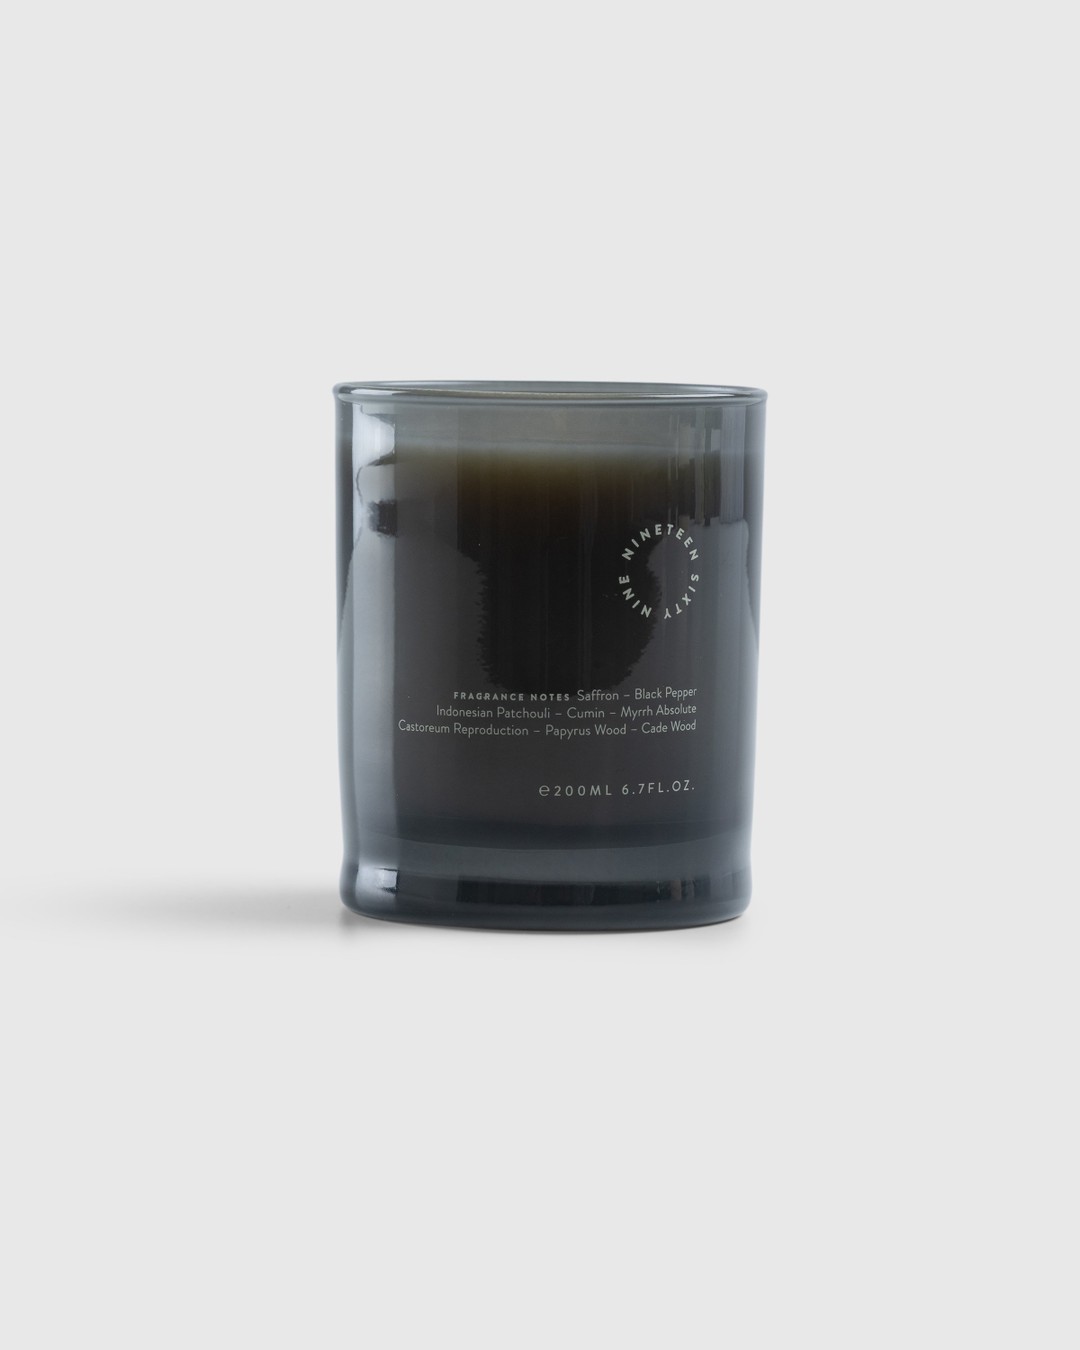 19-69 – Christopher BP Candle - Candles & Fragrances - Grey - Image 2